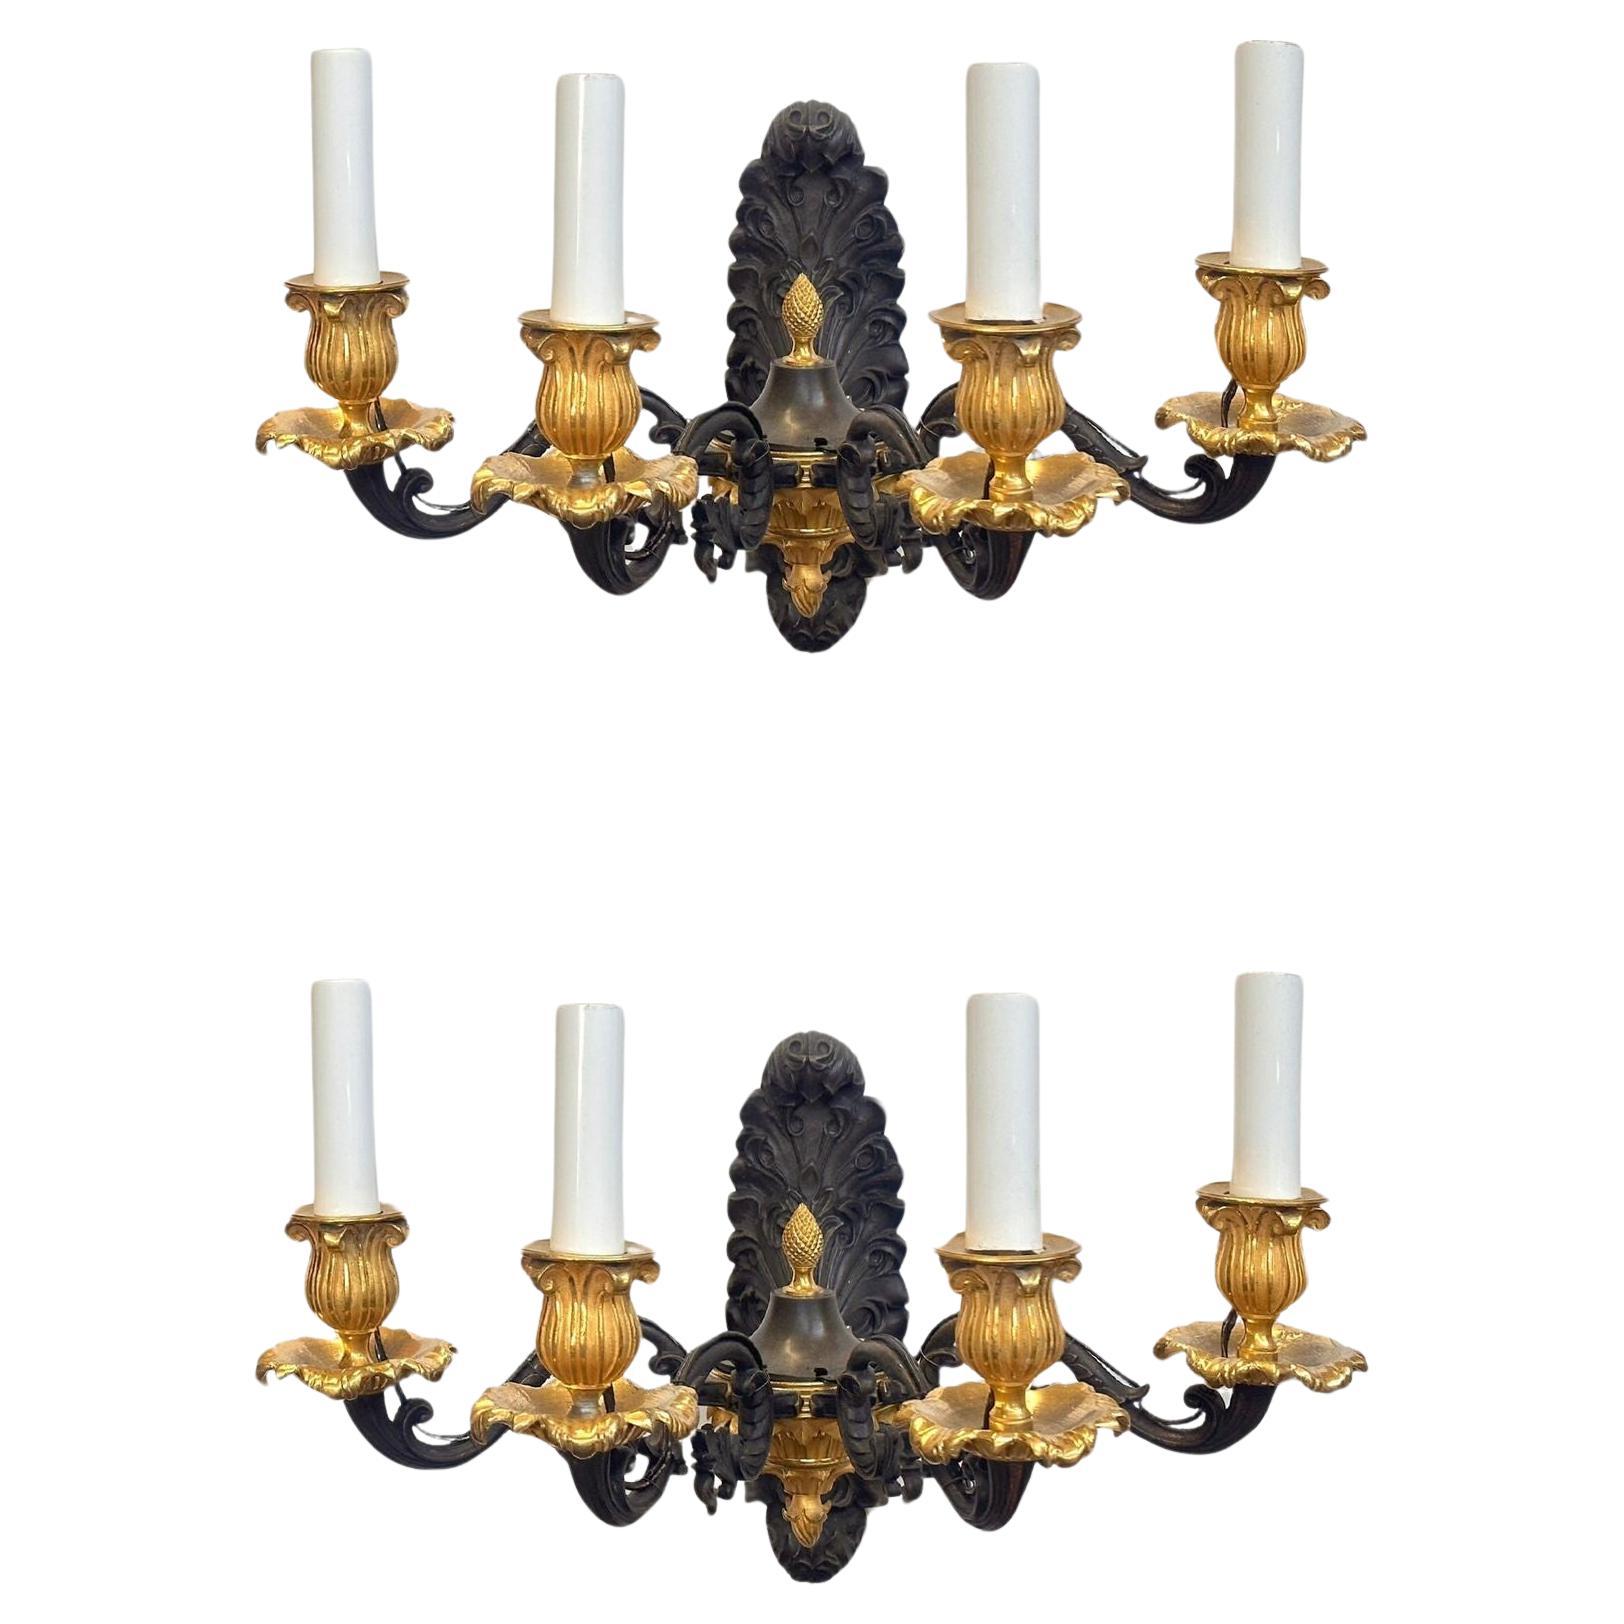 Pair of French Late 19th Century Empire-Style Sconces